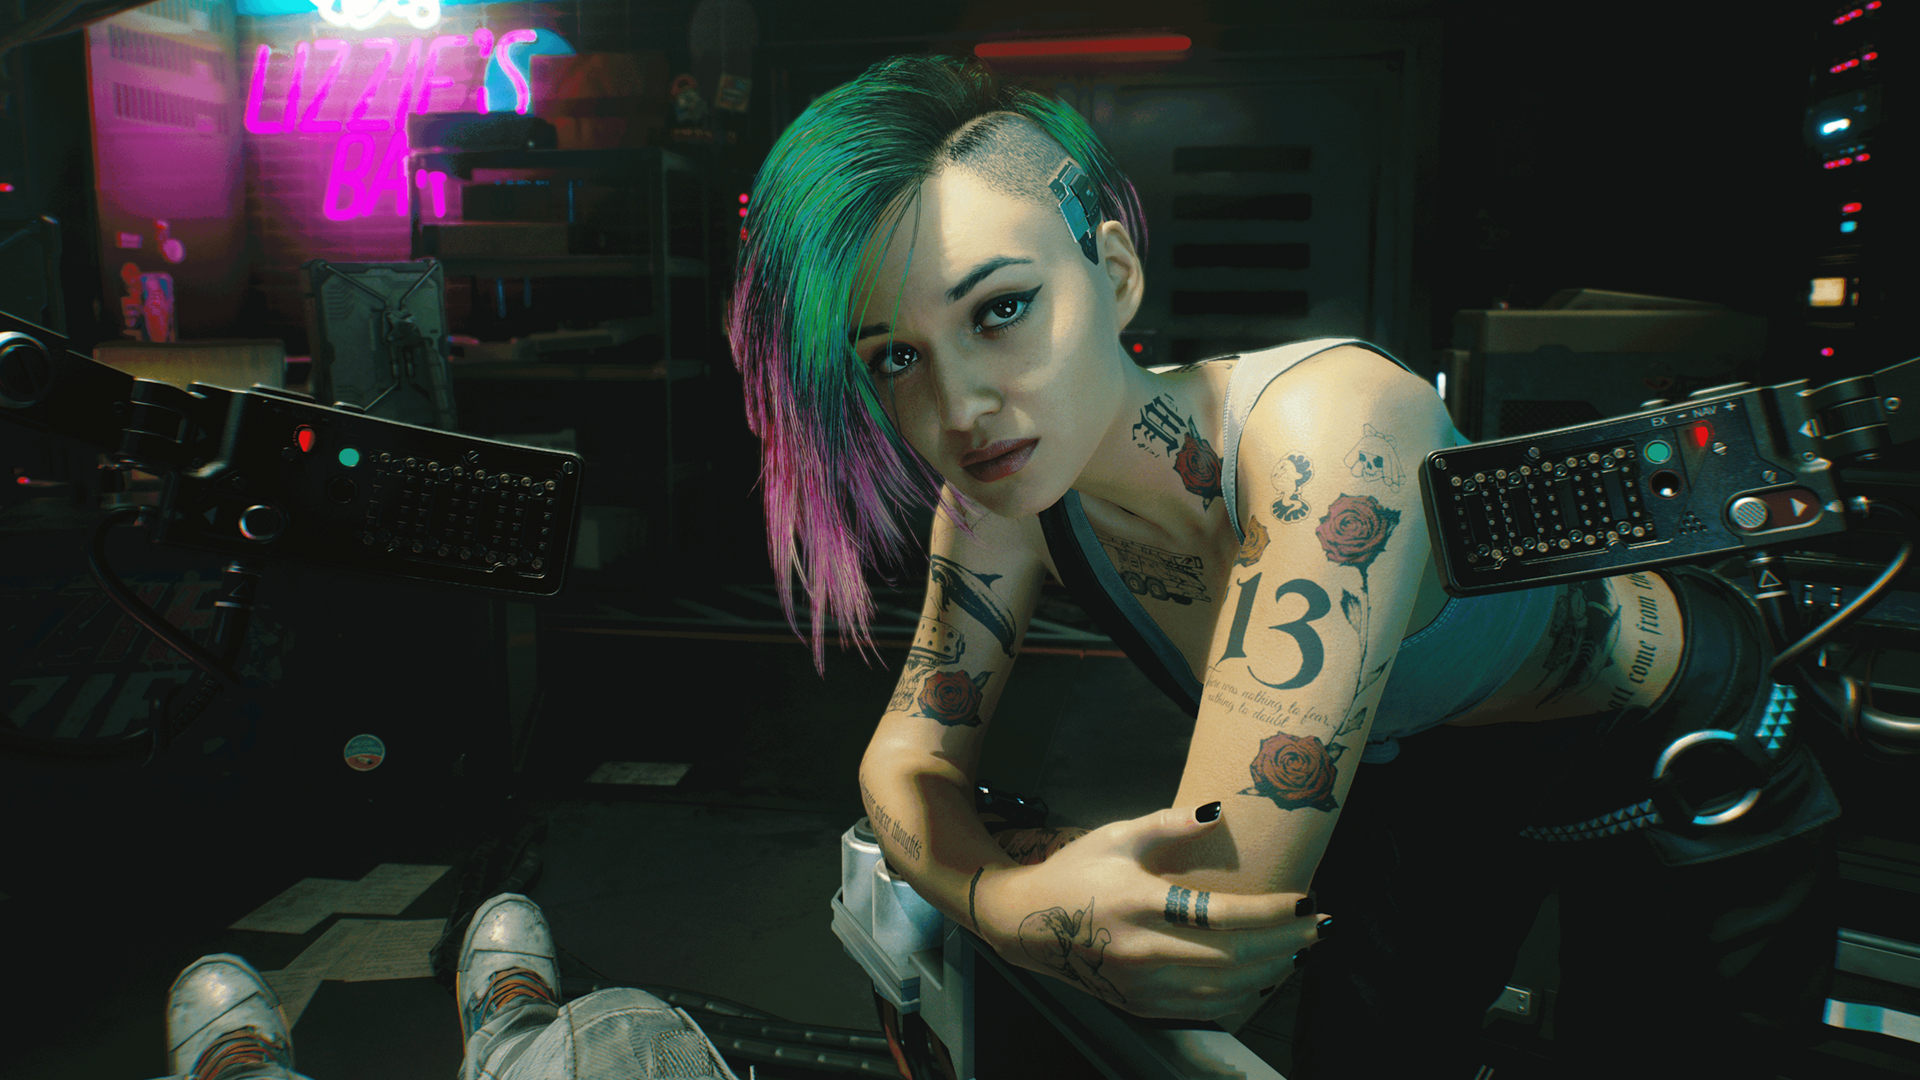  Cyberpunk 2077's quest lead says it's a story 'about terminal illness,' and playing it while staring down the barrel of one was the most intense RPG experience I've ever had 